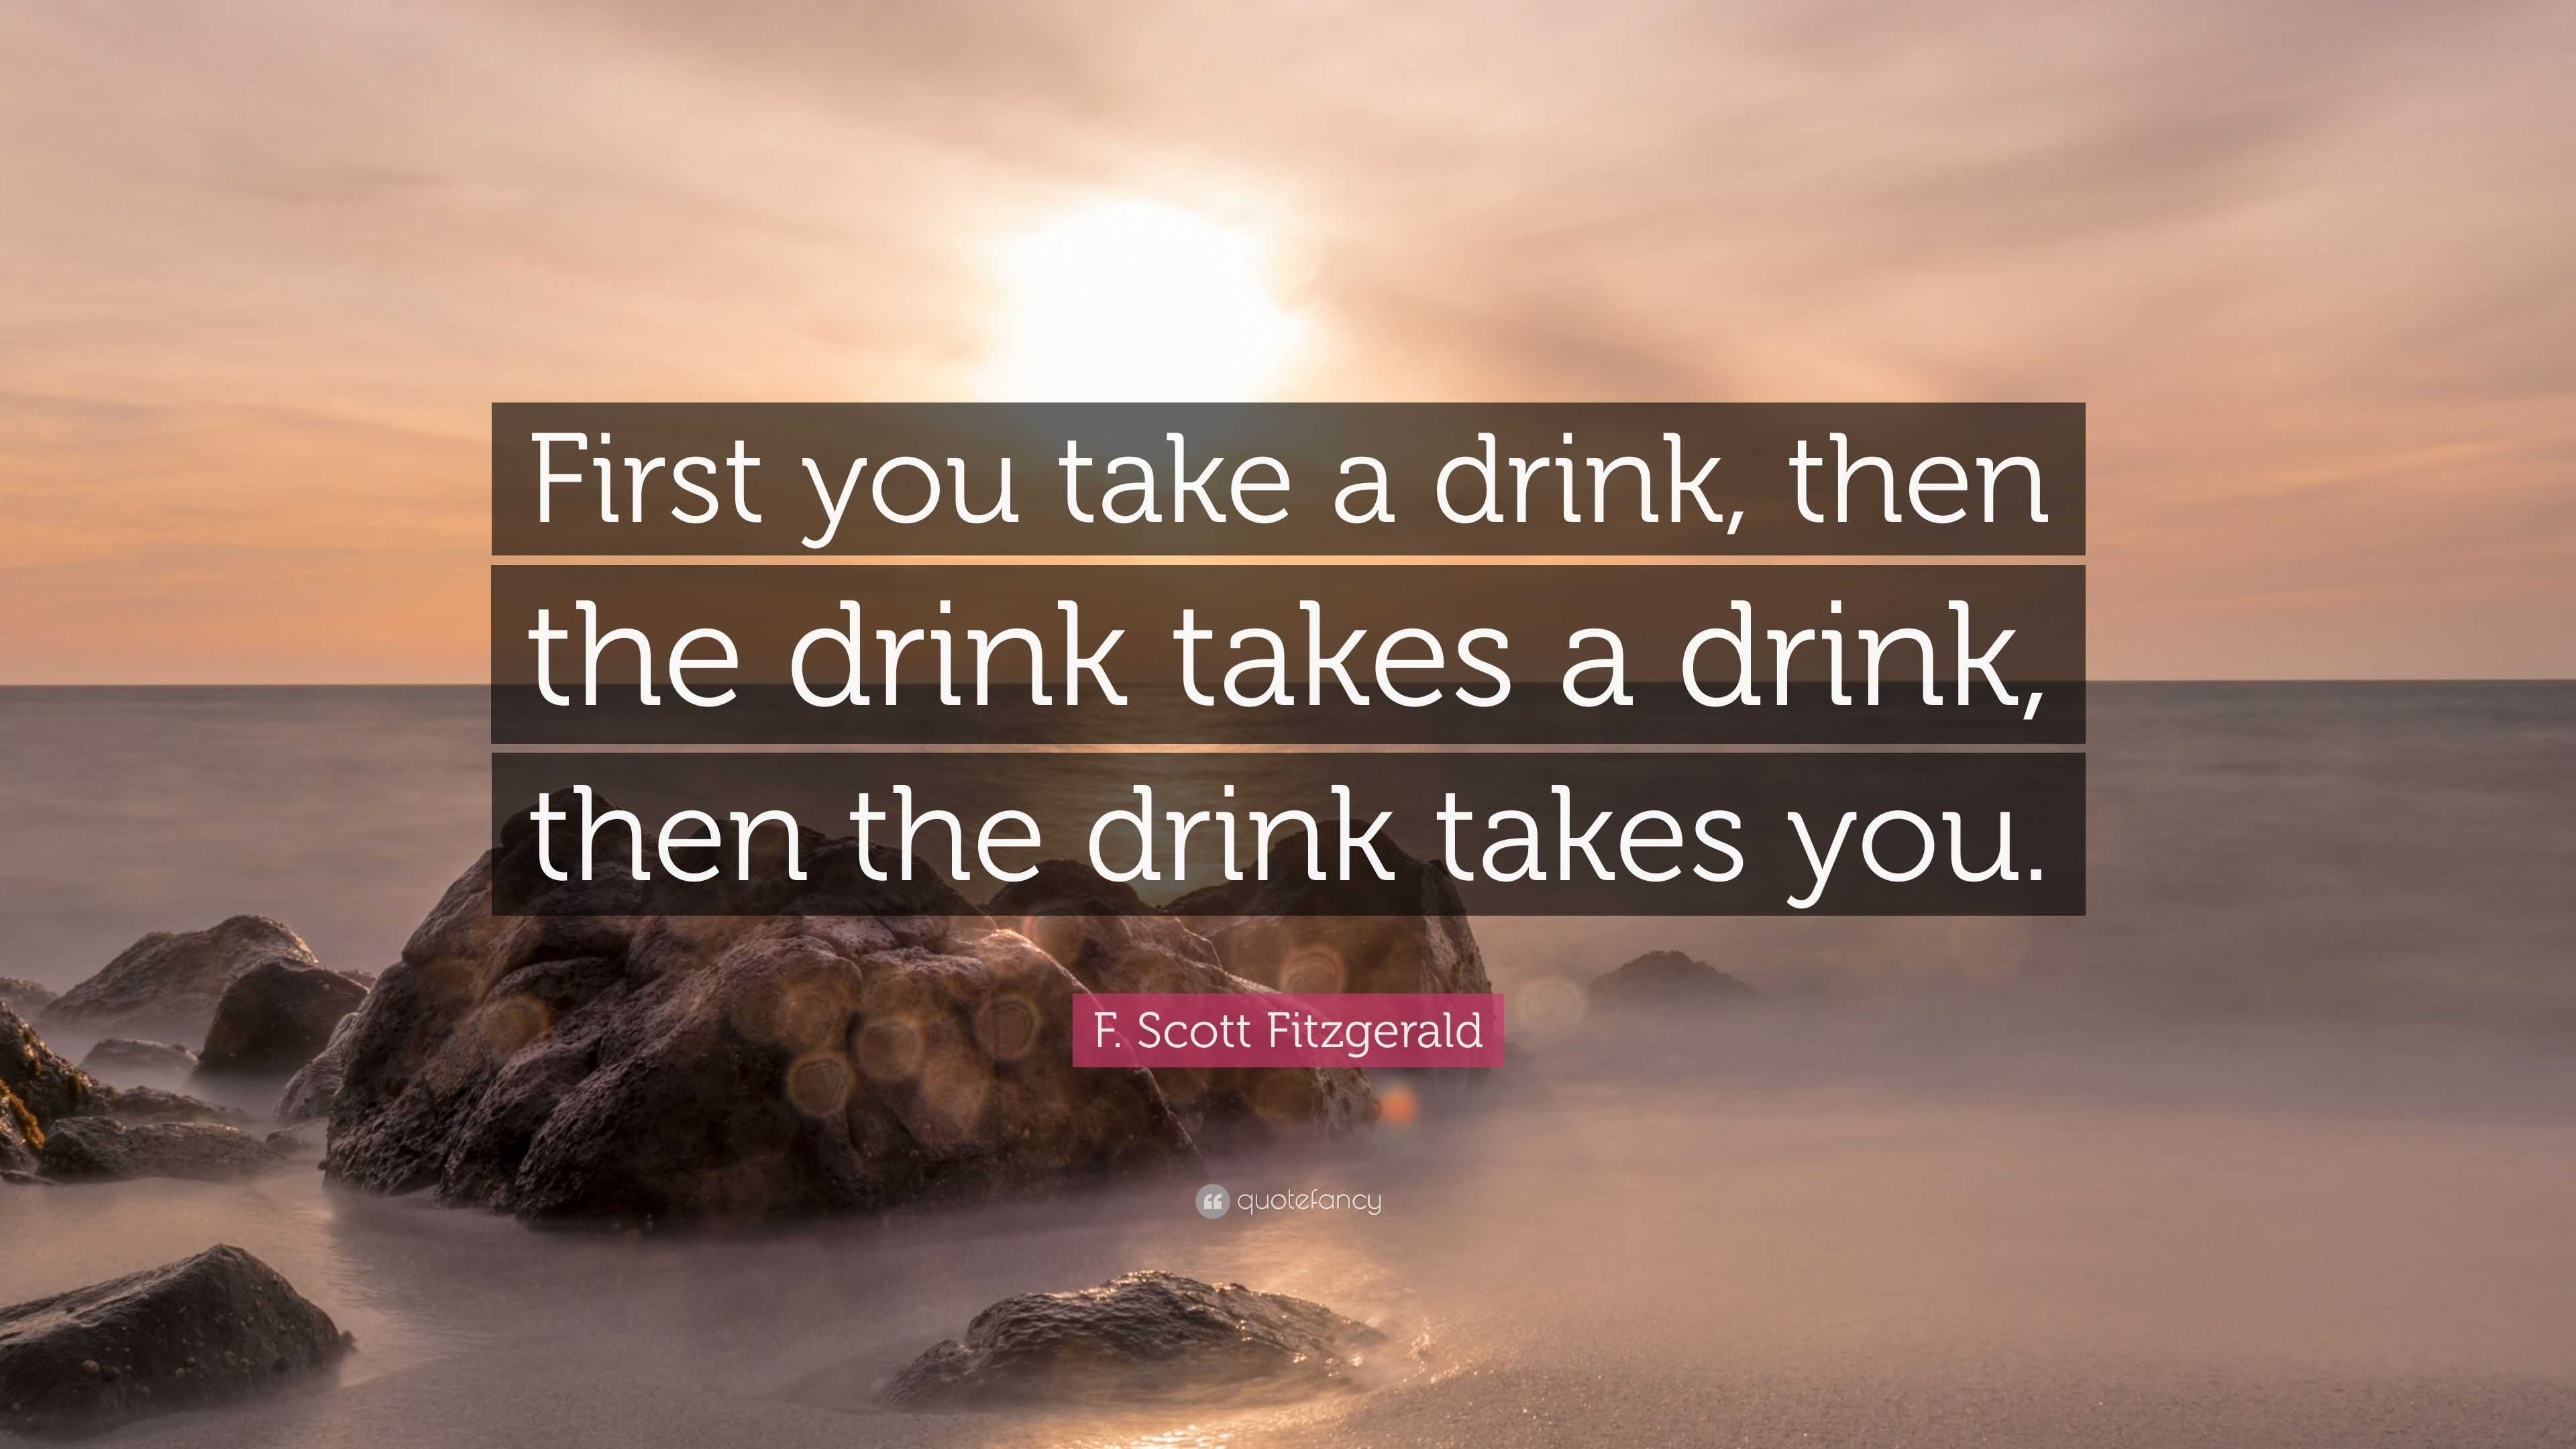 F Scott Fitzgerald Quote First You Take A Drink Then The Drink Takes A Drink Then